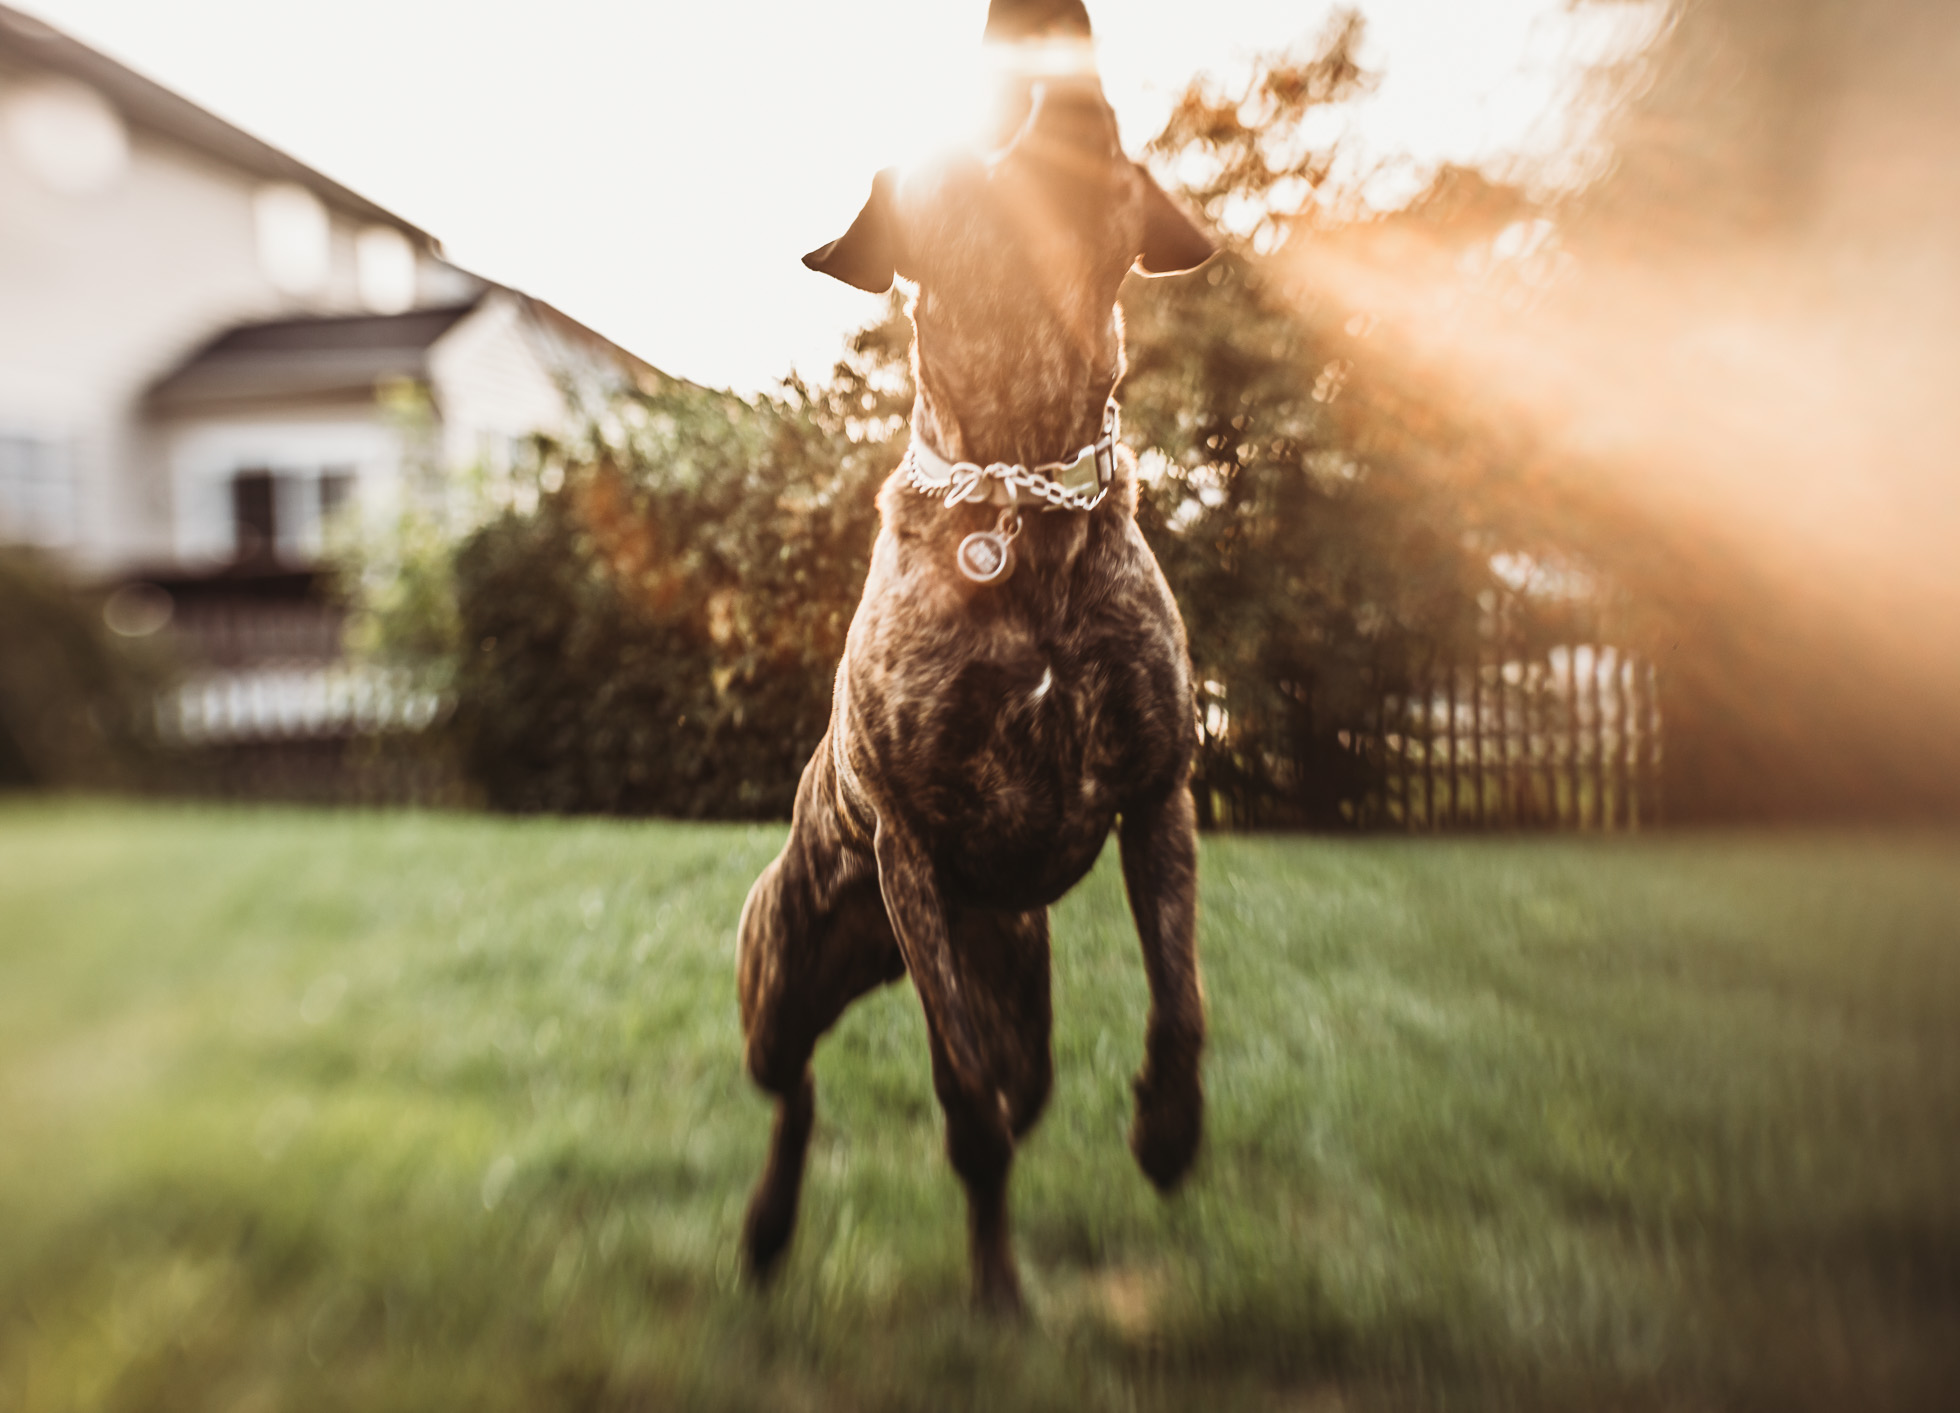 Creative Photograph of dogs running